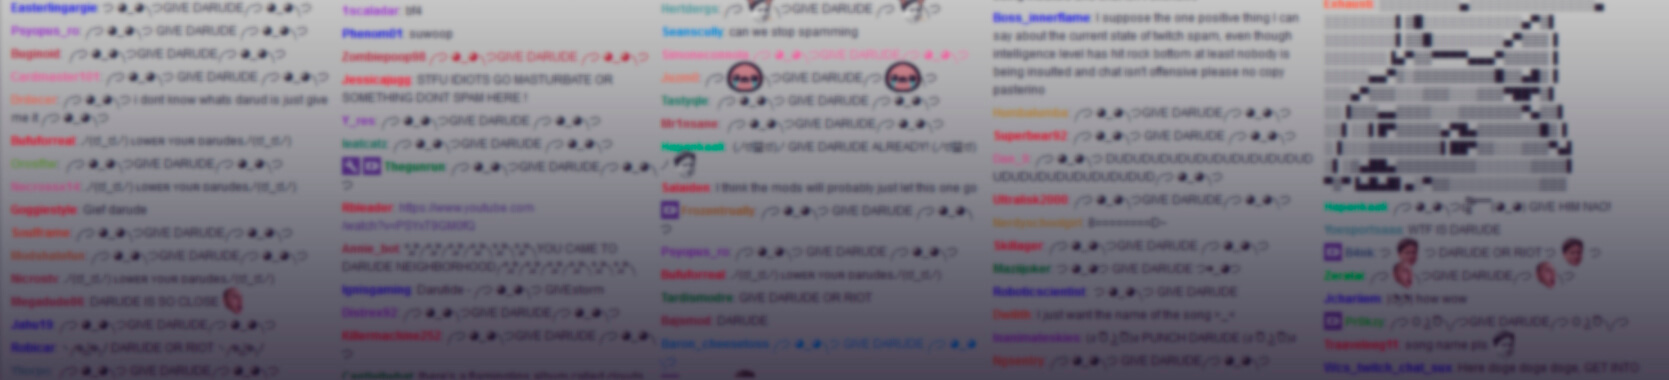 Twitch chat going ham